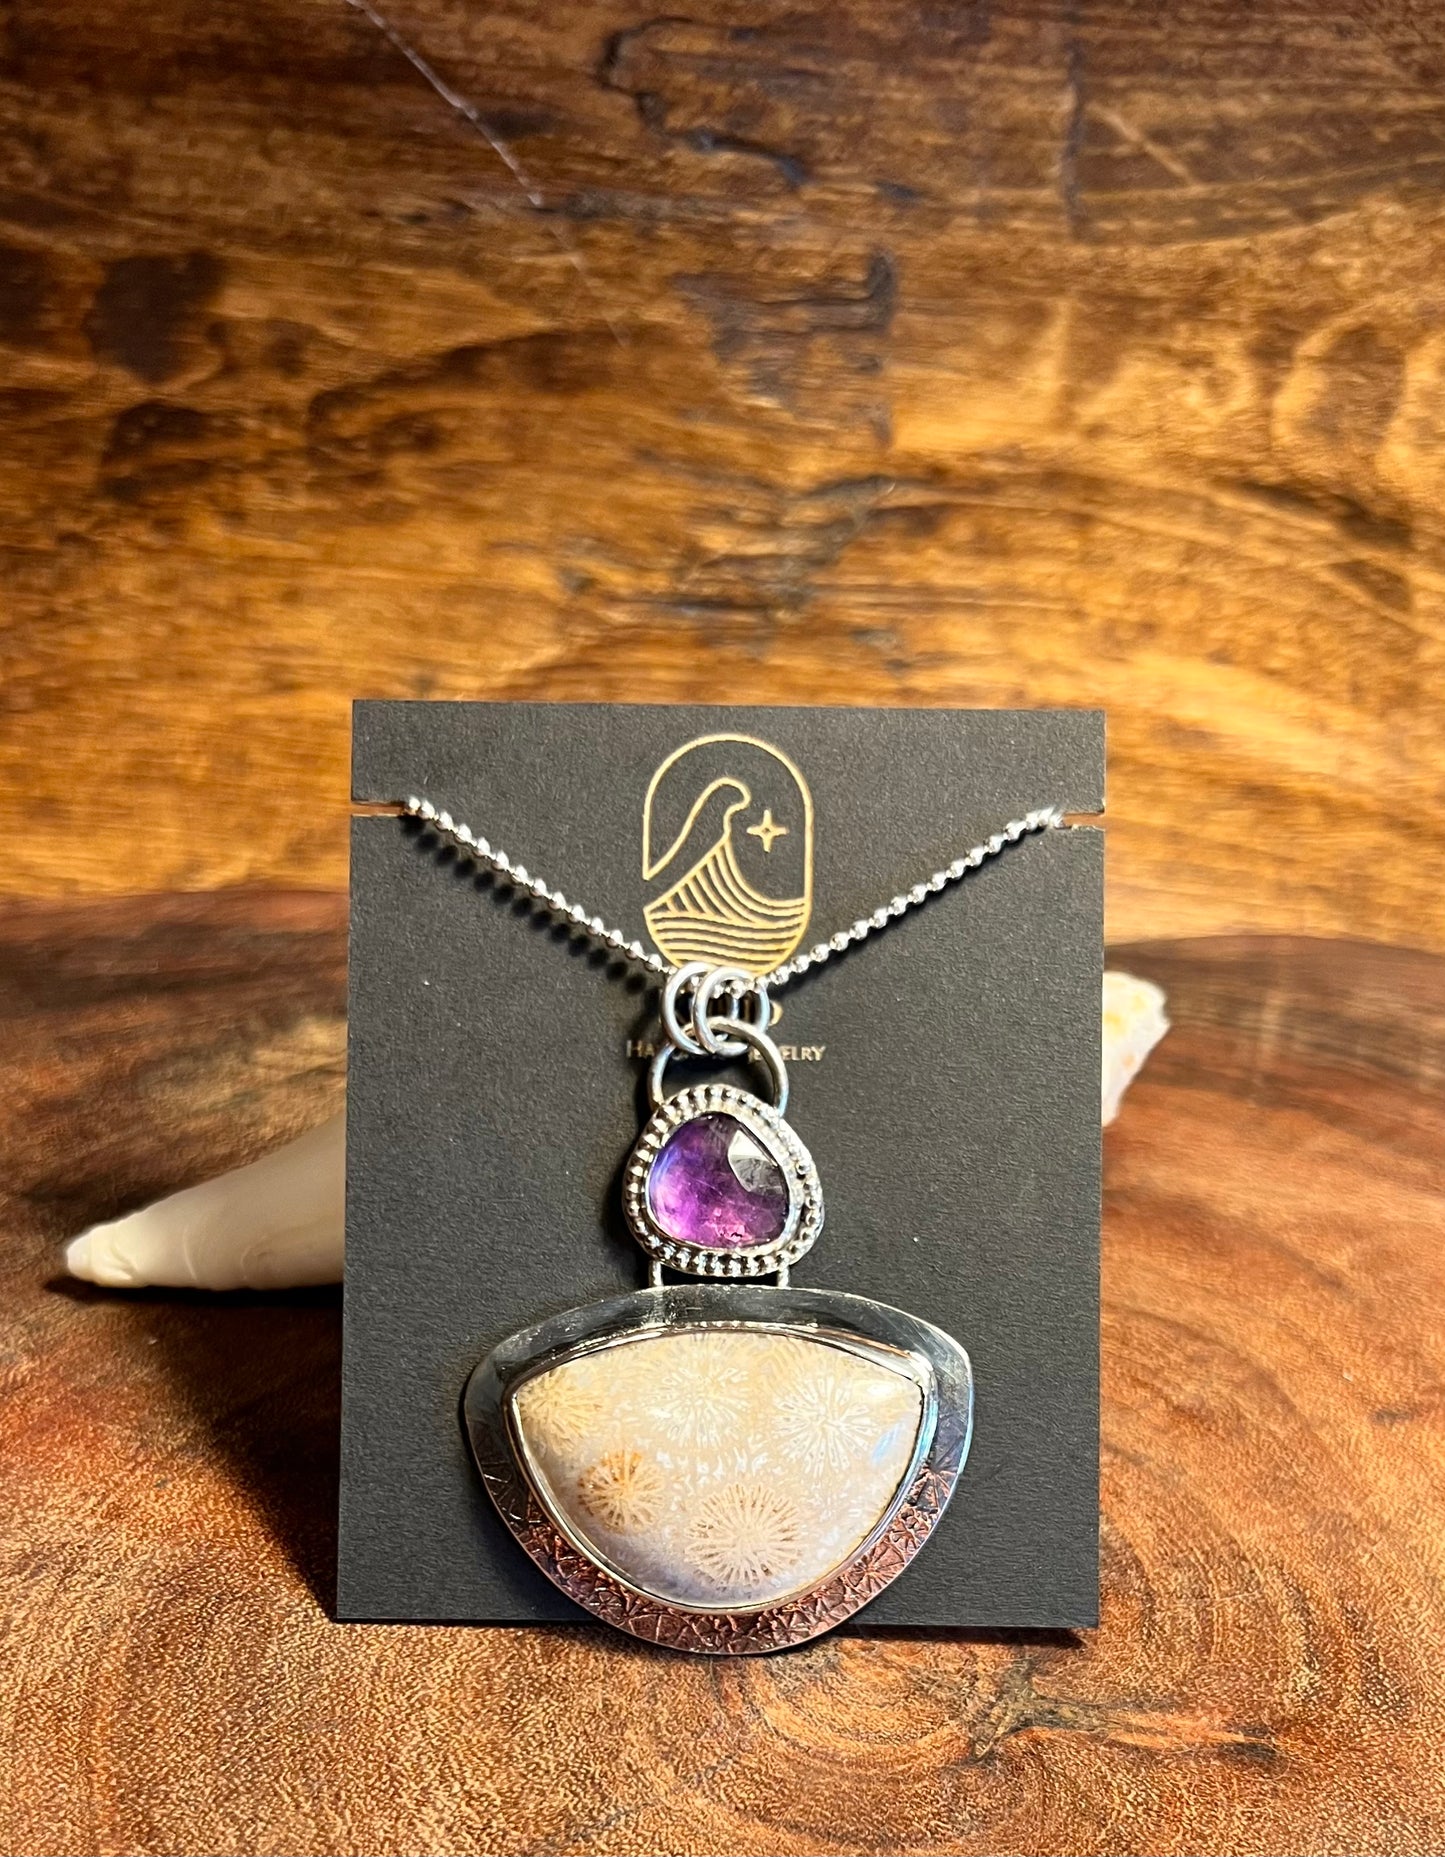 Fossilized Coral and Amethyst Pendant